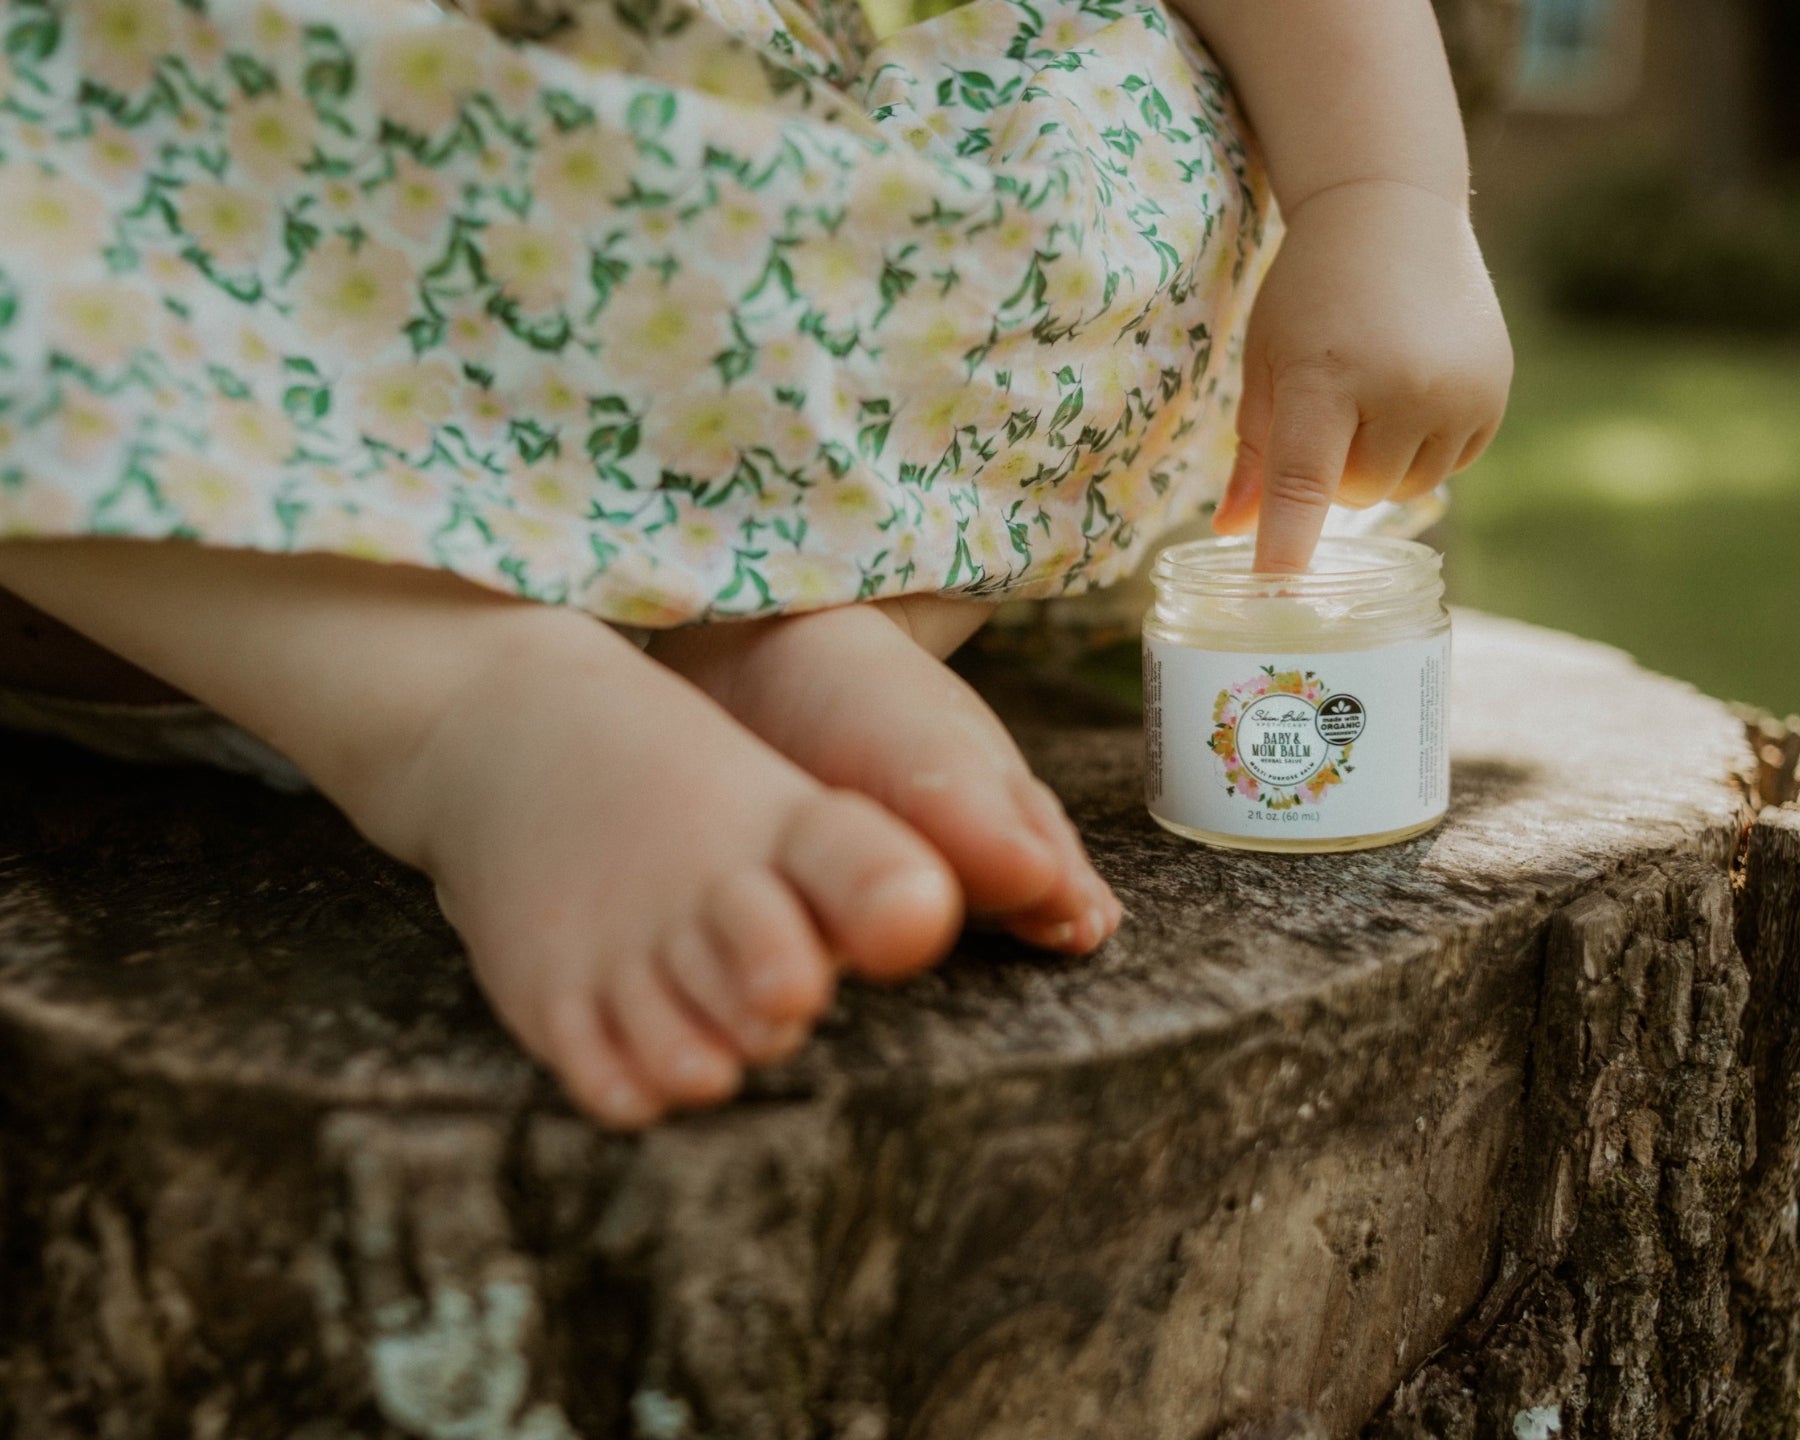 A toddler sits on a tree stump while scooping the Baby & Mom Balm out of the jar with her finger.